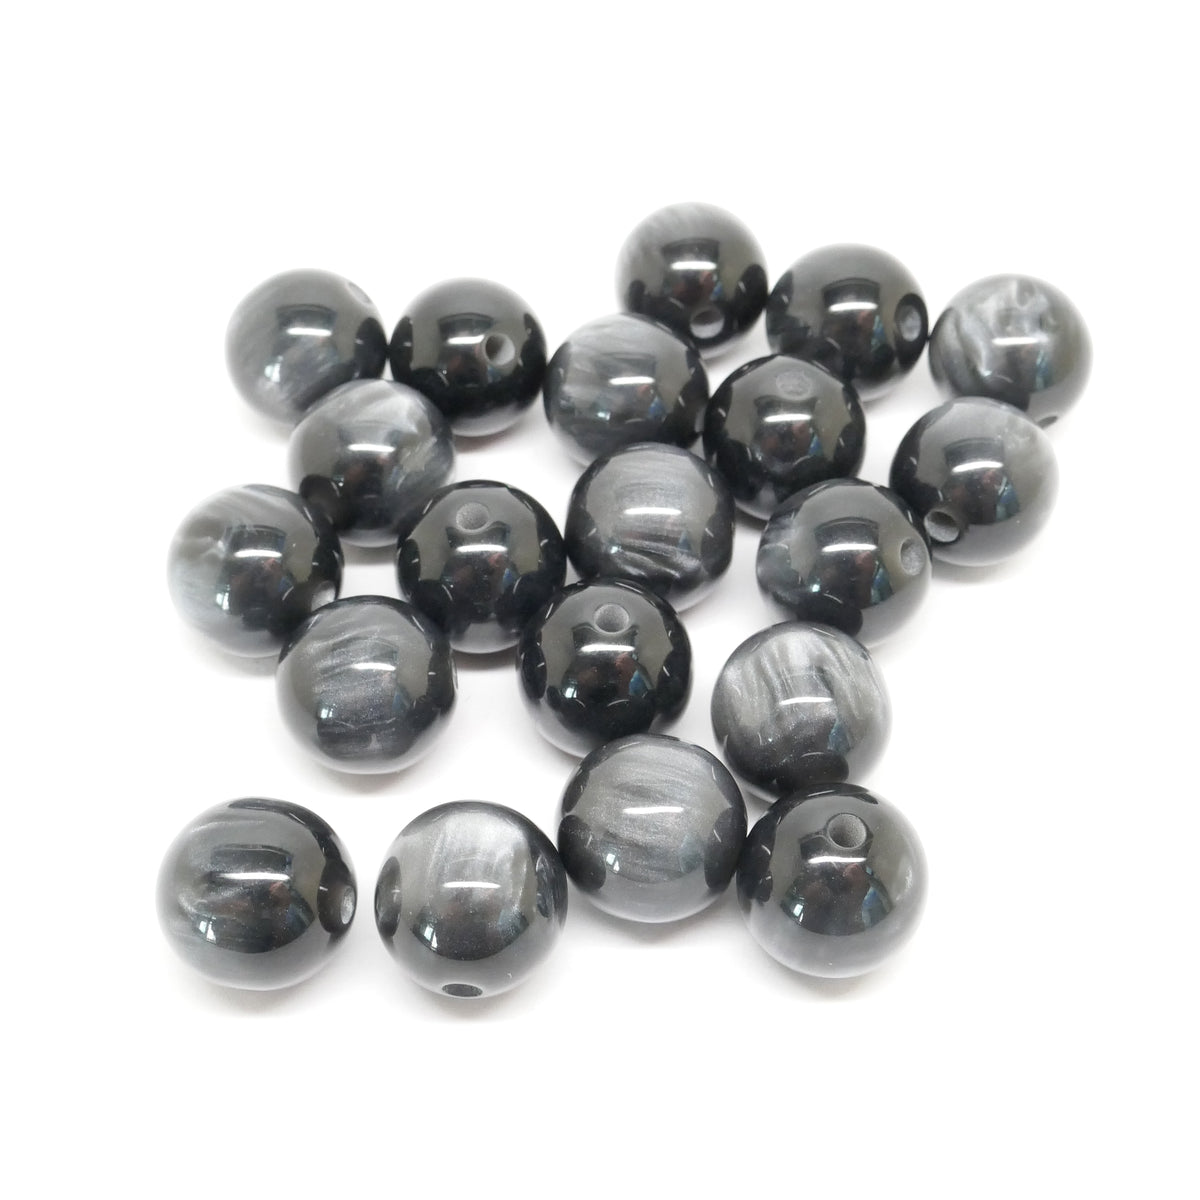 200 Black Wooden Macrame Beads 17mm x 16mm with 7mm Large Hole